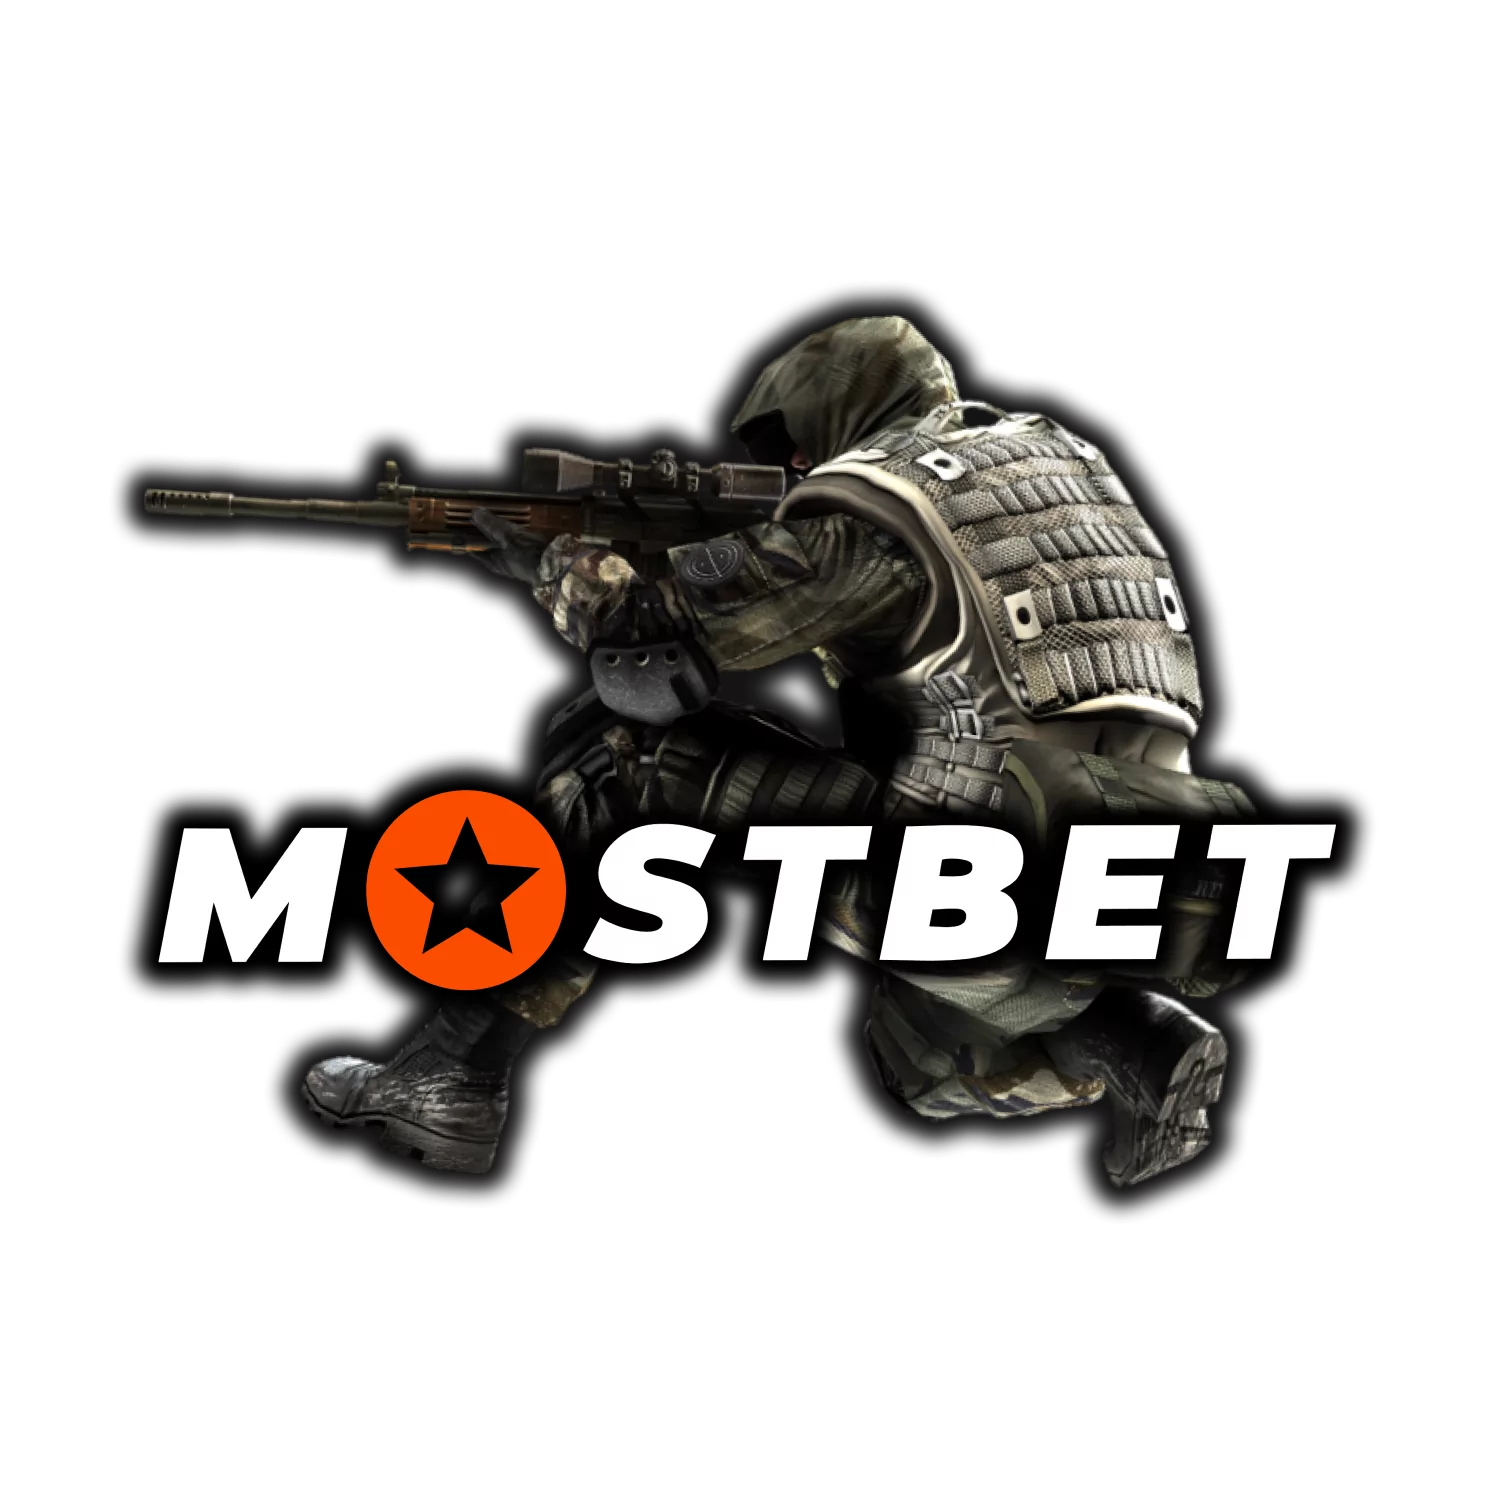 At Mostbet, spend your time betting on CS:GO.